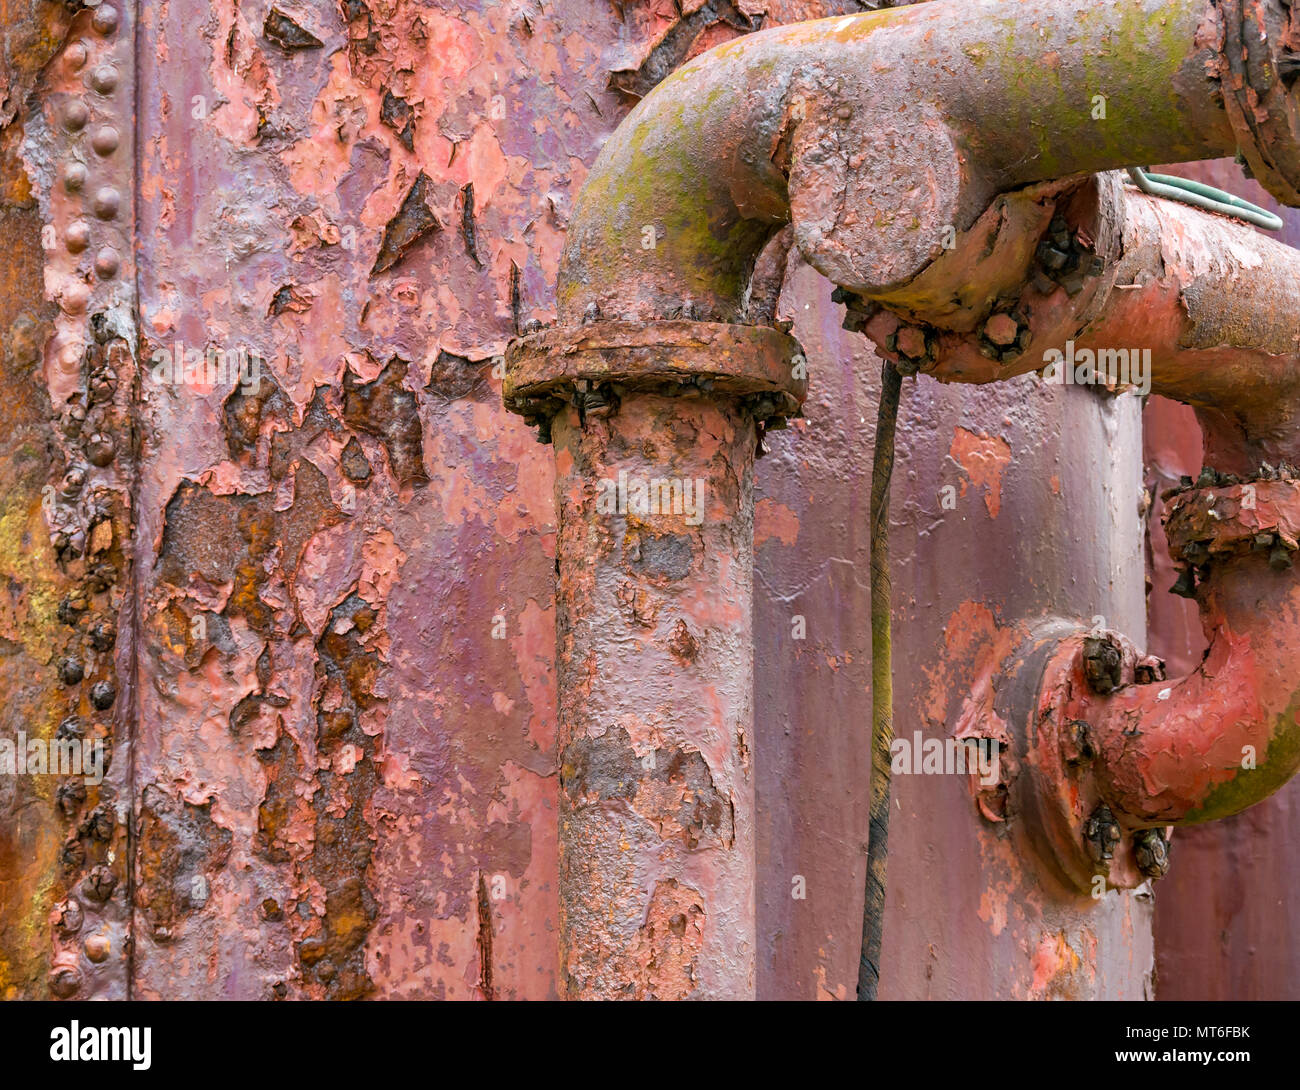 Close up of rusty very old metal tanks and pipes, Isle of May foghorn compressor, Scotland, Uk Stock Photo